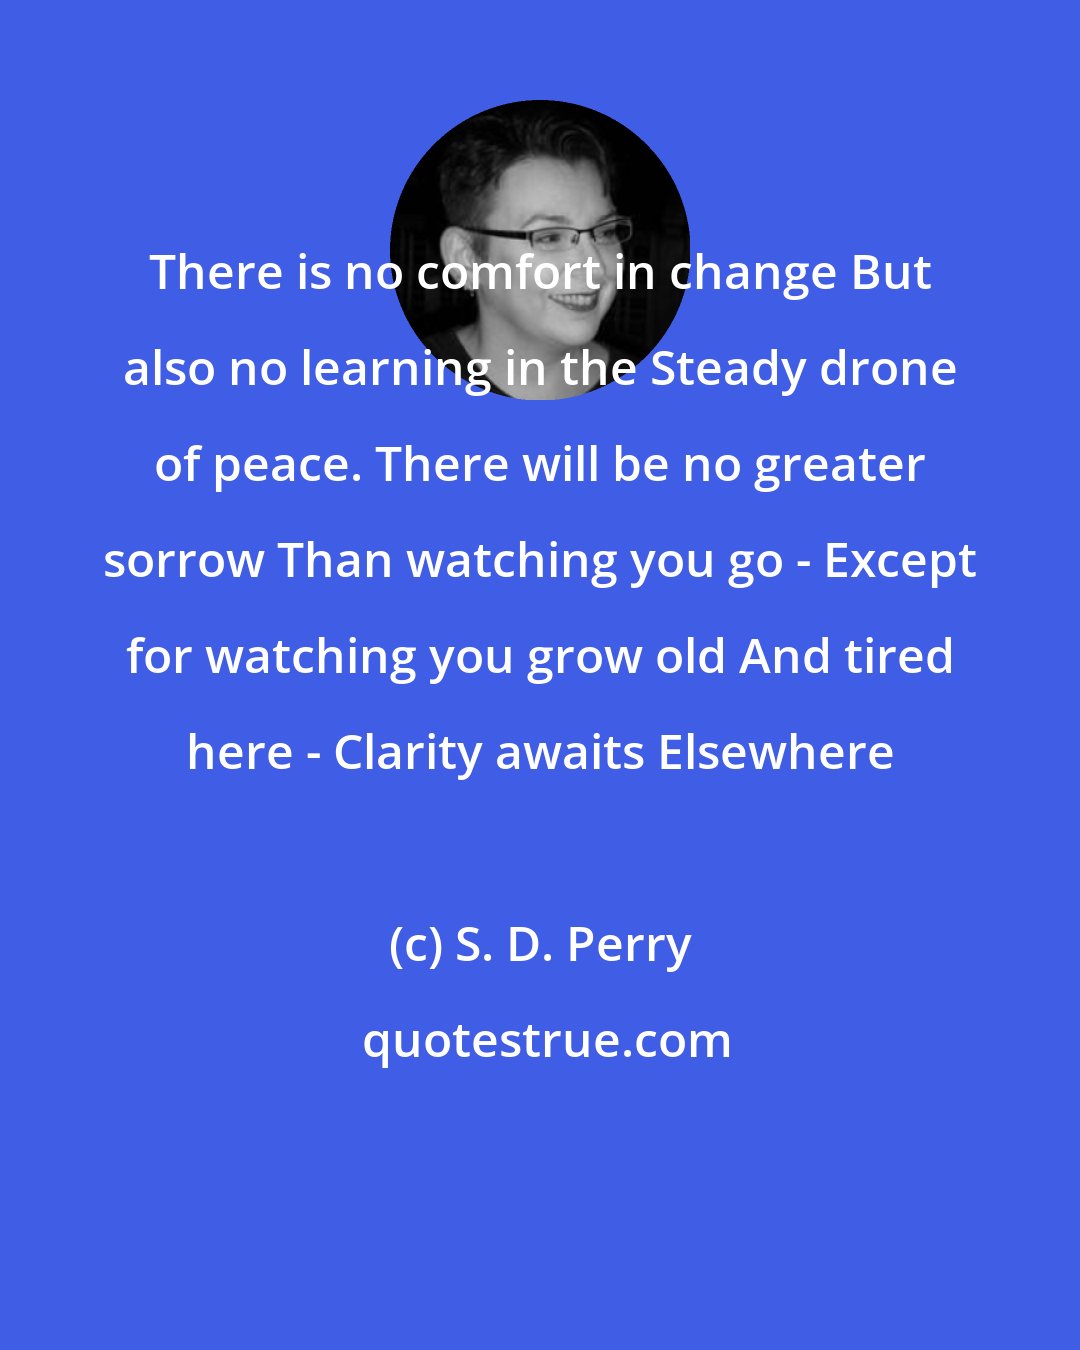 S. D. Perry: There is no comfort in change But also no learning in the Steady drone of peace. There will be no greater sorrow Than watching you go - Except for watching you grow old And tired here - Clarity awaits Elsewhere